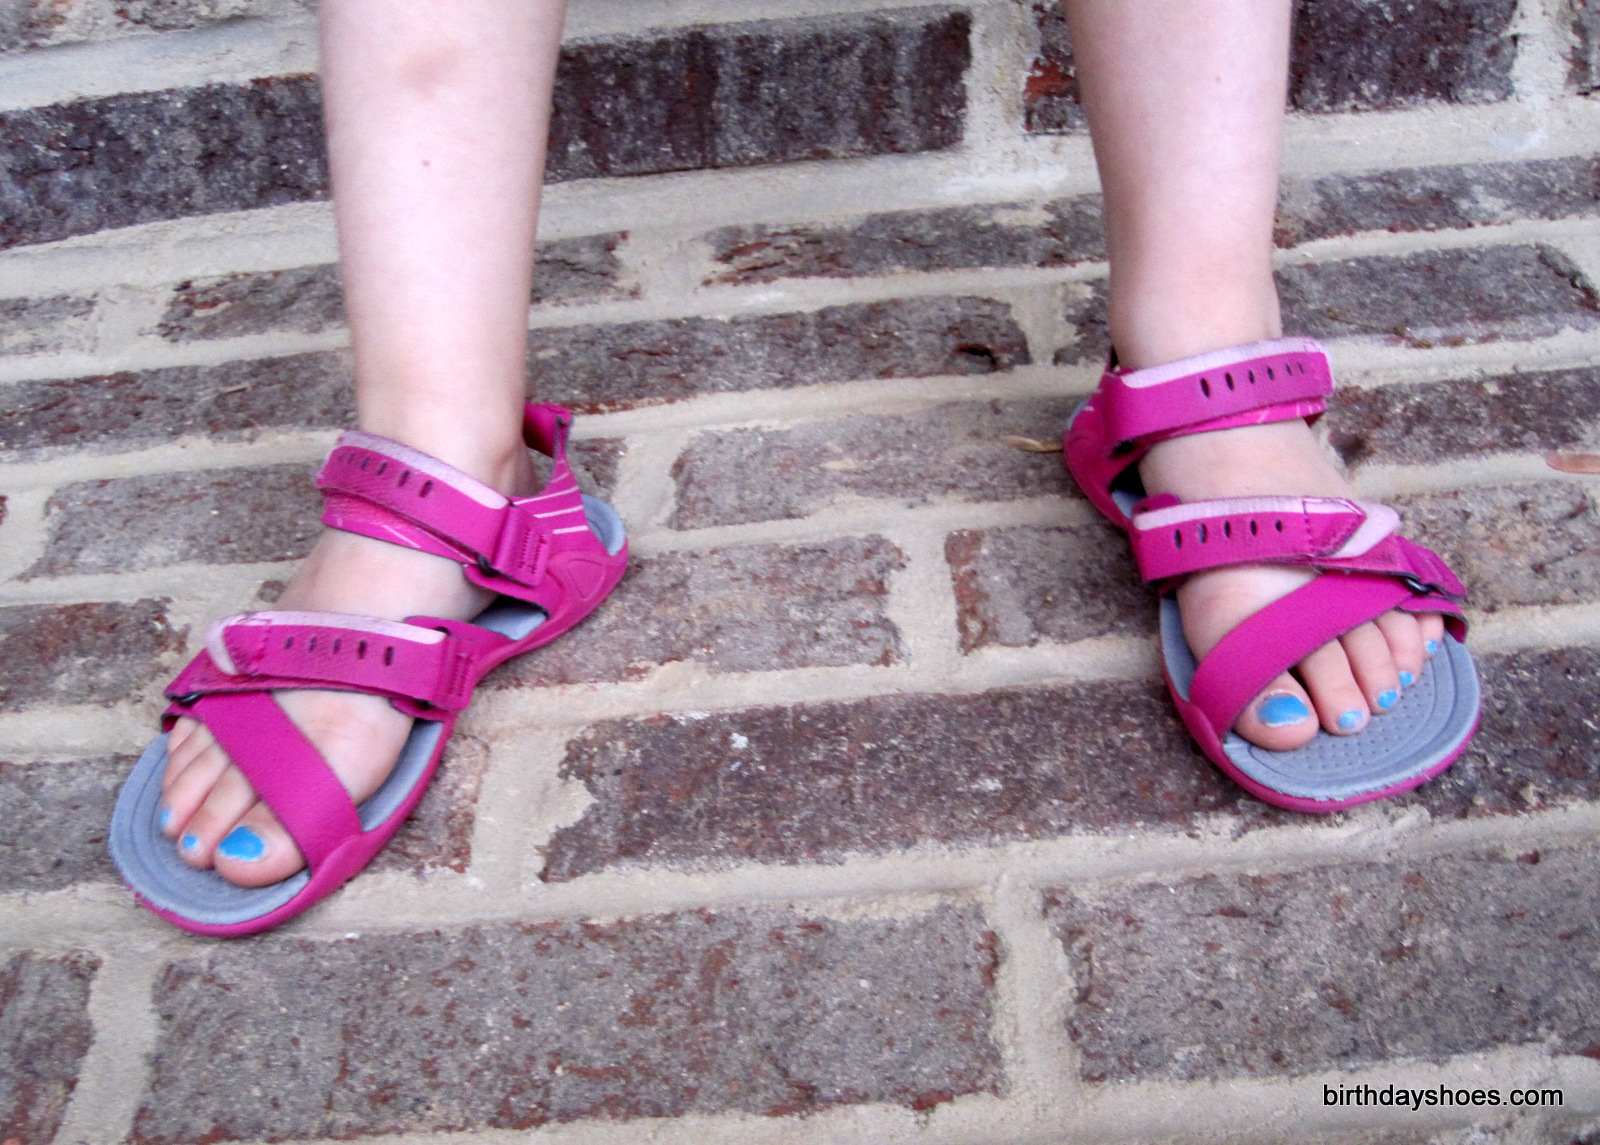 stereo Beeldhouwwerk slogan Teva Zilch Minimalist Sandals for Toddlers/Kids Review - Birthday Shoes -  Toe Shoes, Barefoot or Minimalist Shoes, and Vibram FiveFingers Reviews,  News, Forums